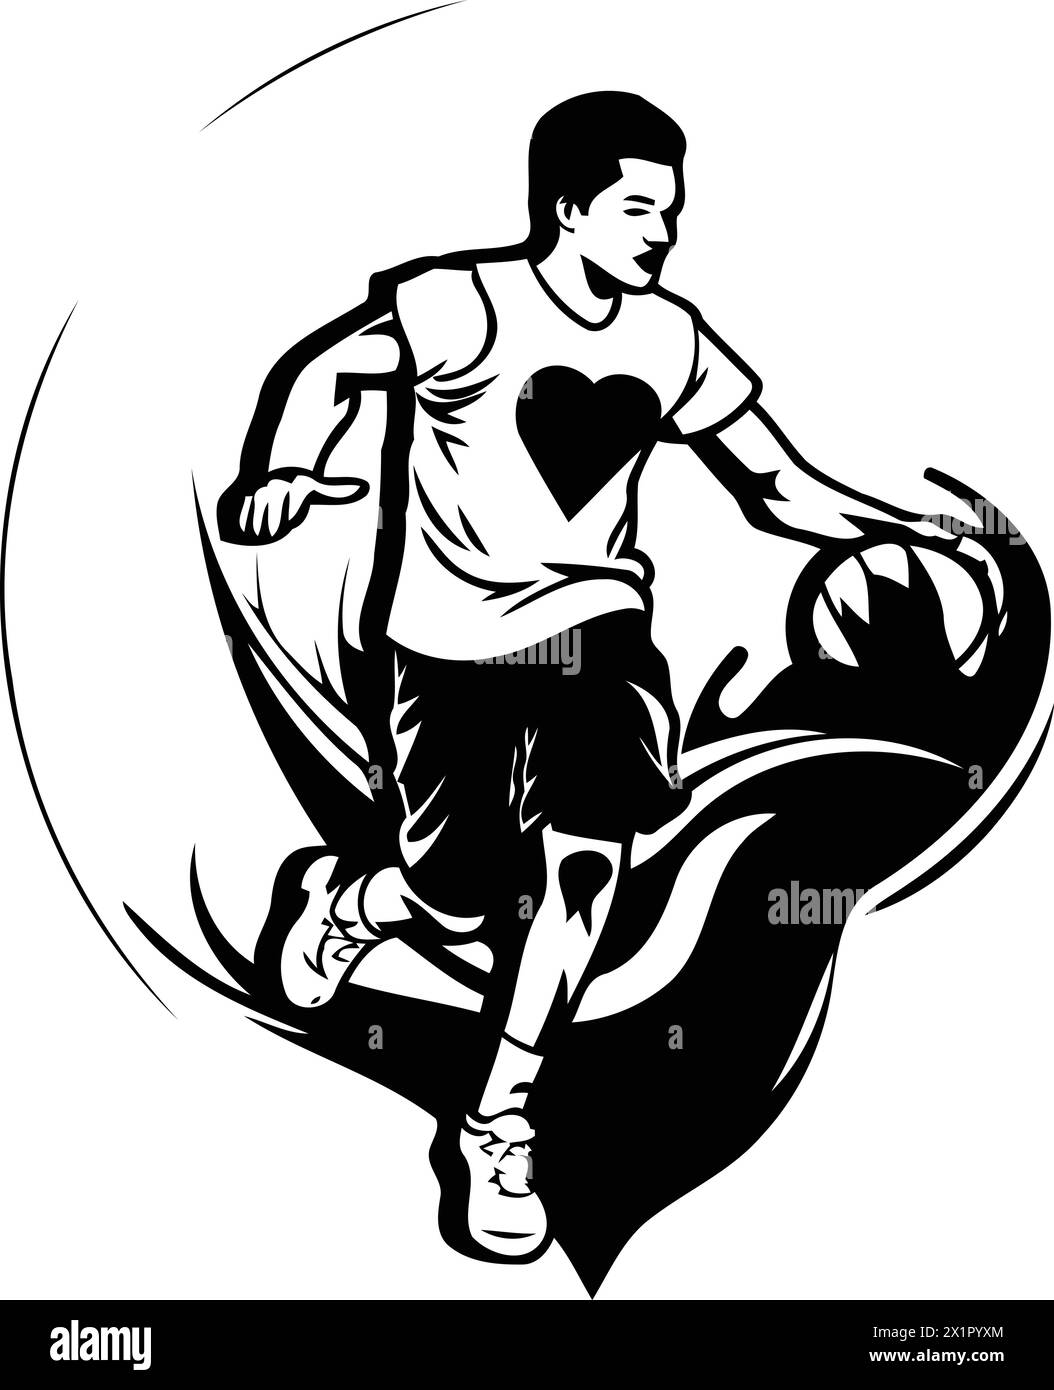 Basketball player with ball on fire background. Vector Illustration. Stock Vector